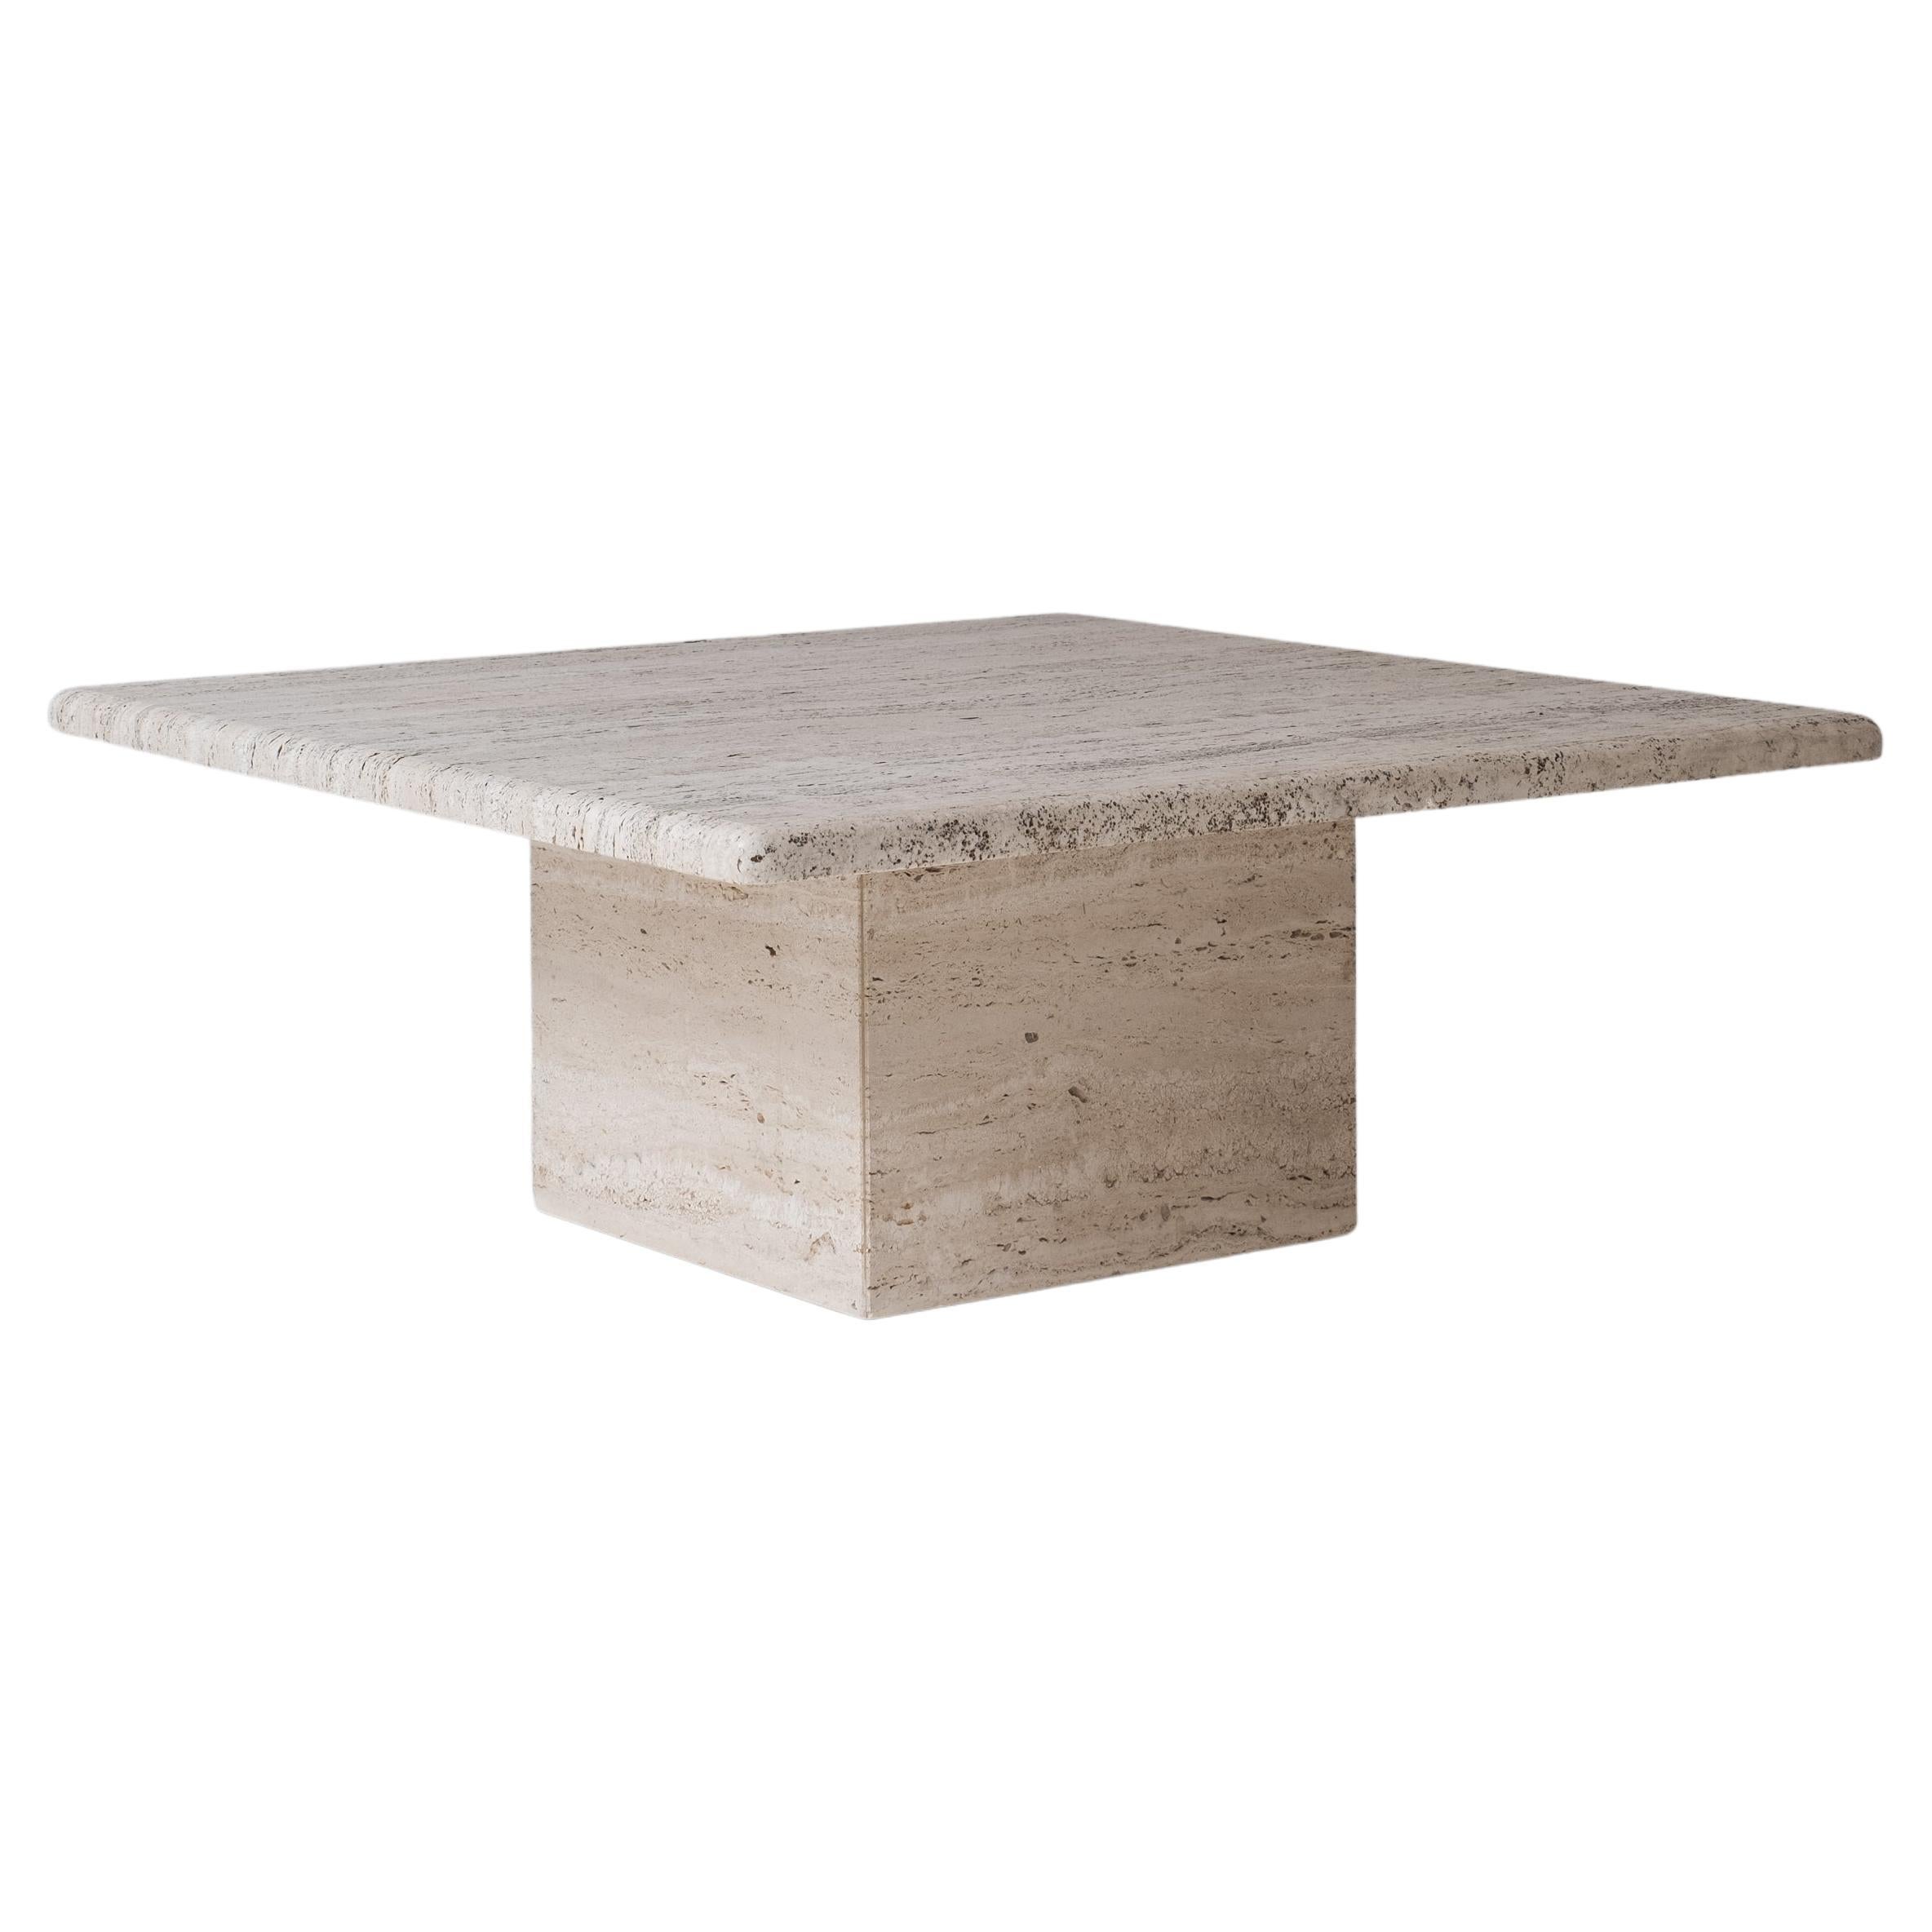 Square coffee table in travertine from the 1970’s. 